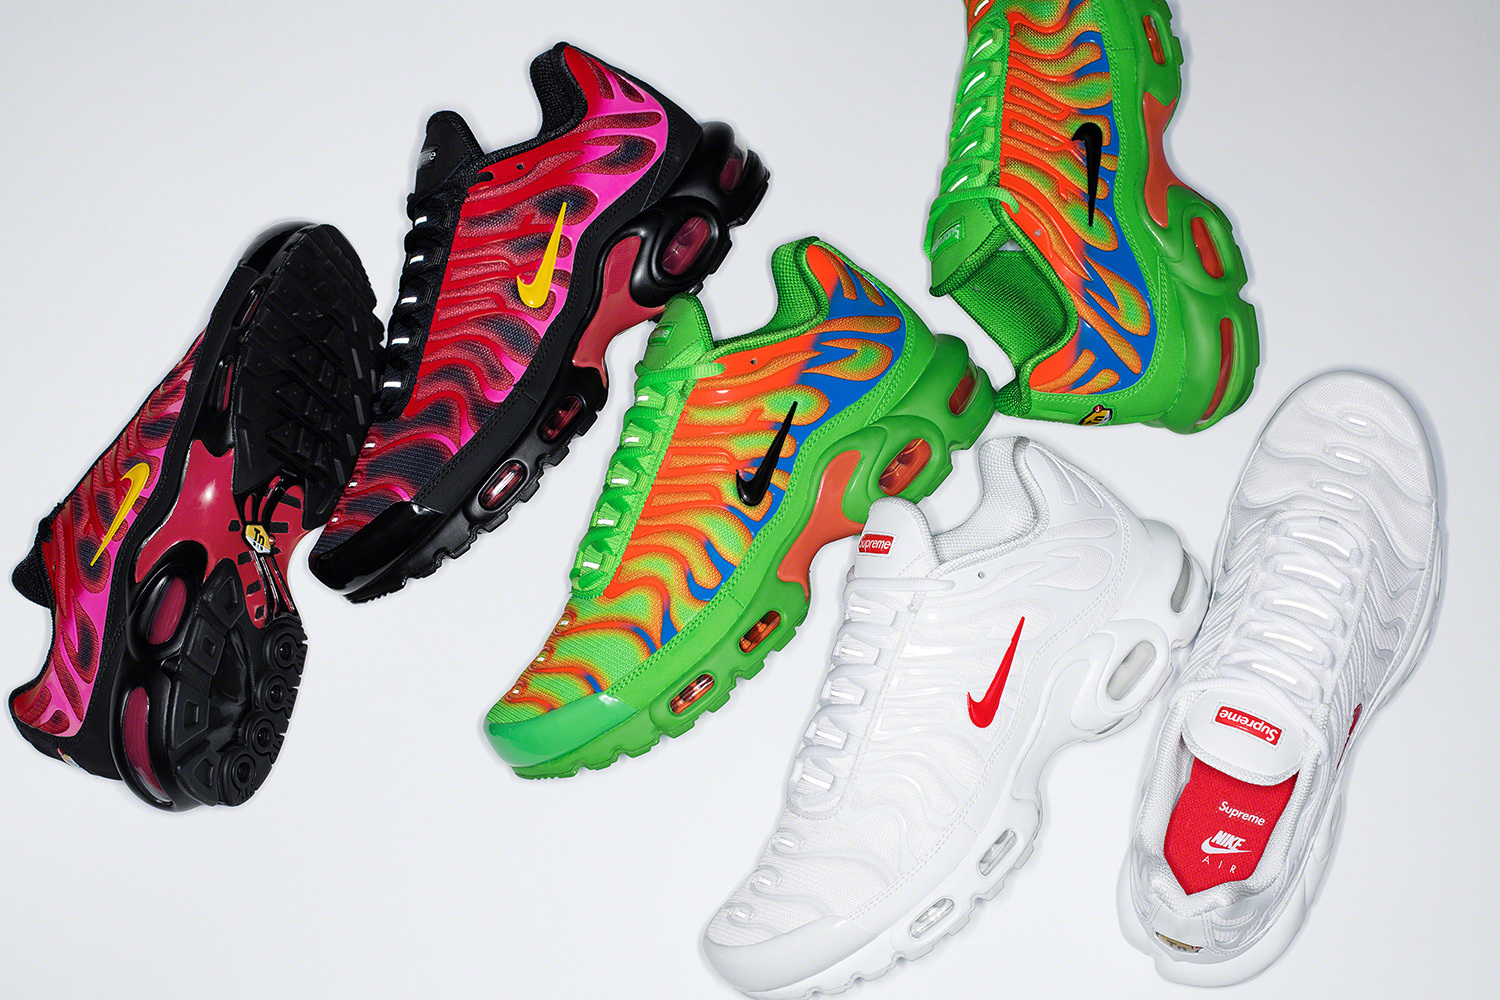 Supreme Nike Shoes Ranked From the Yay to the Nay!